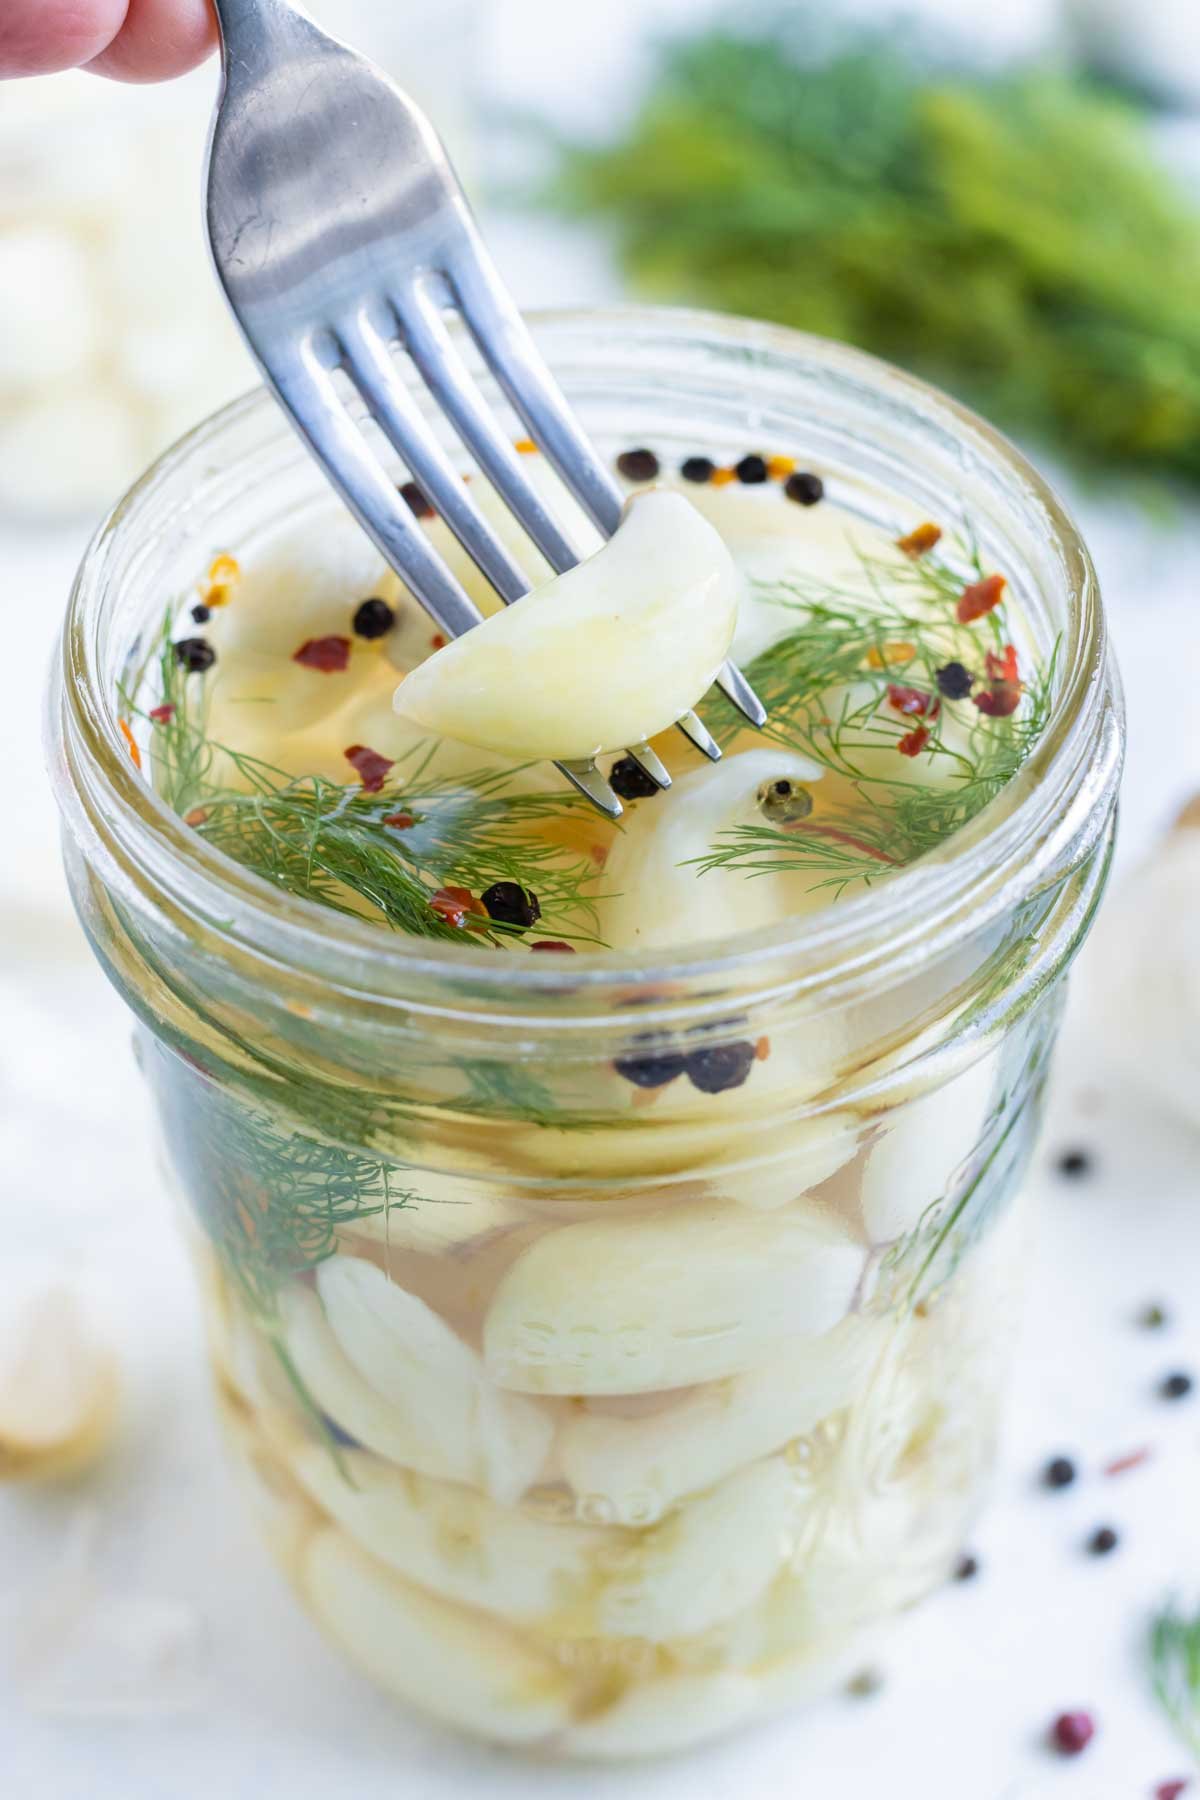 A fork scoops a piece of pickled garlic out of a jar.